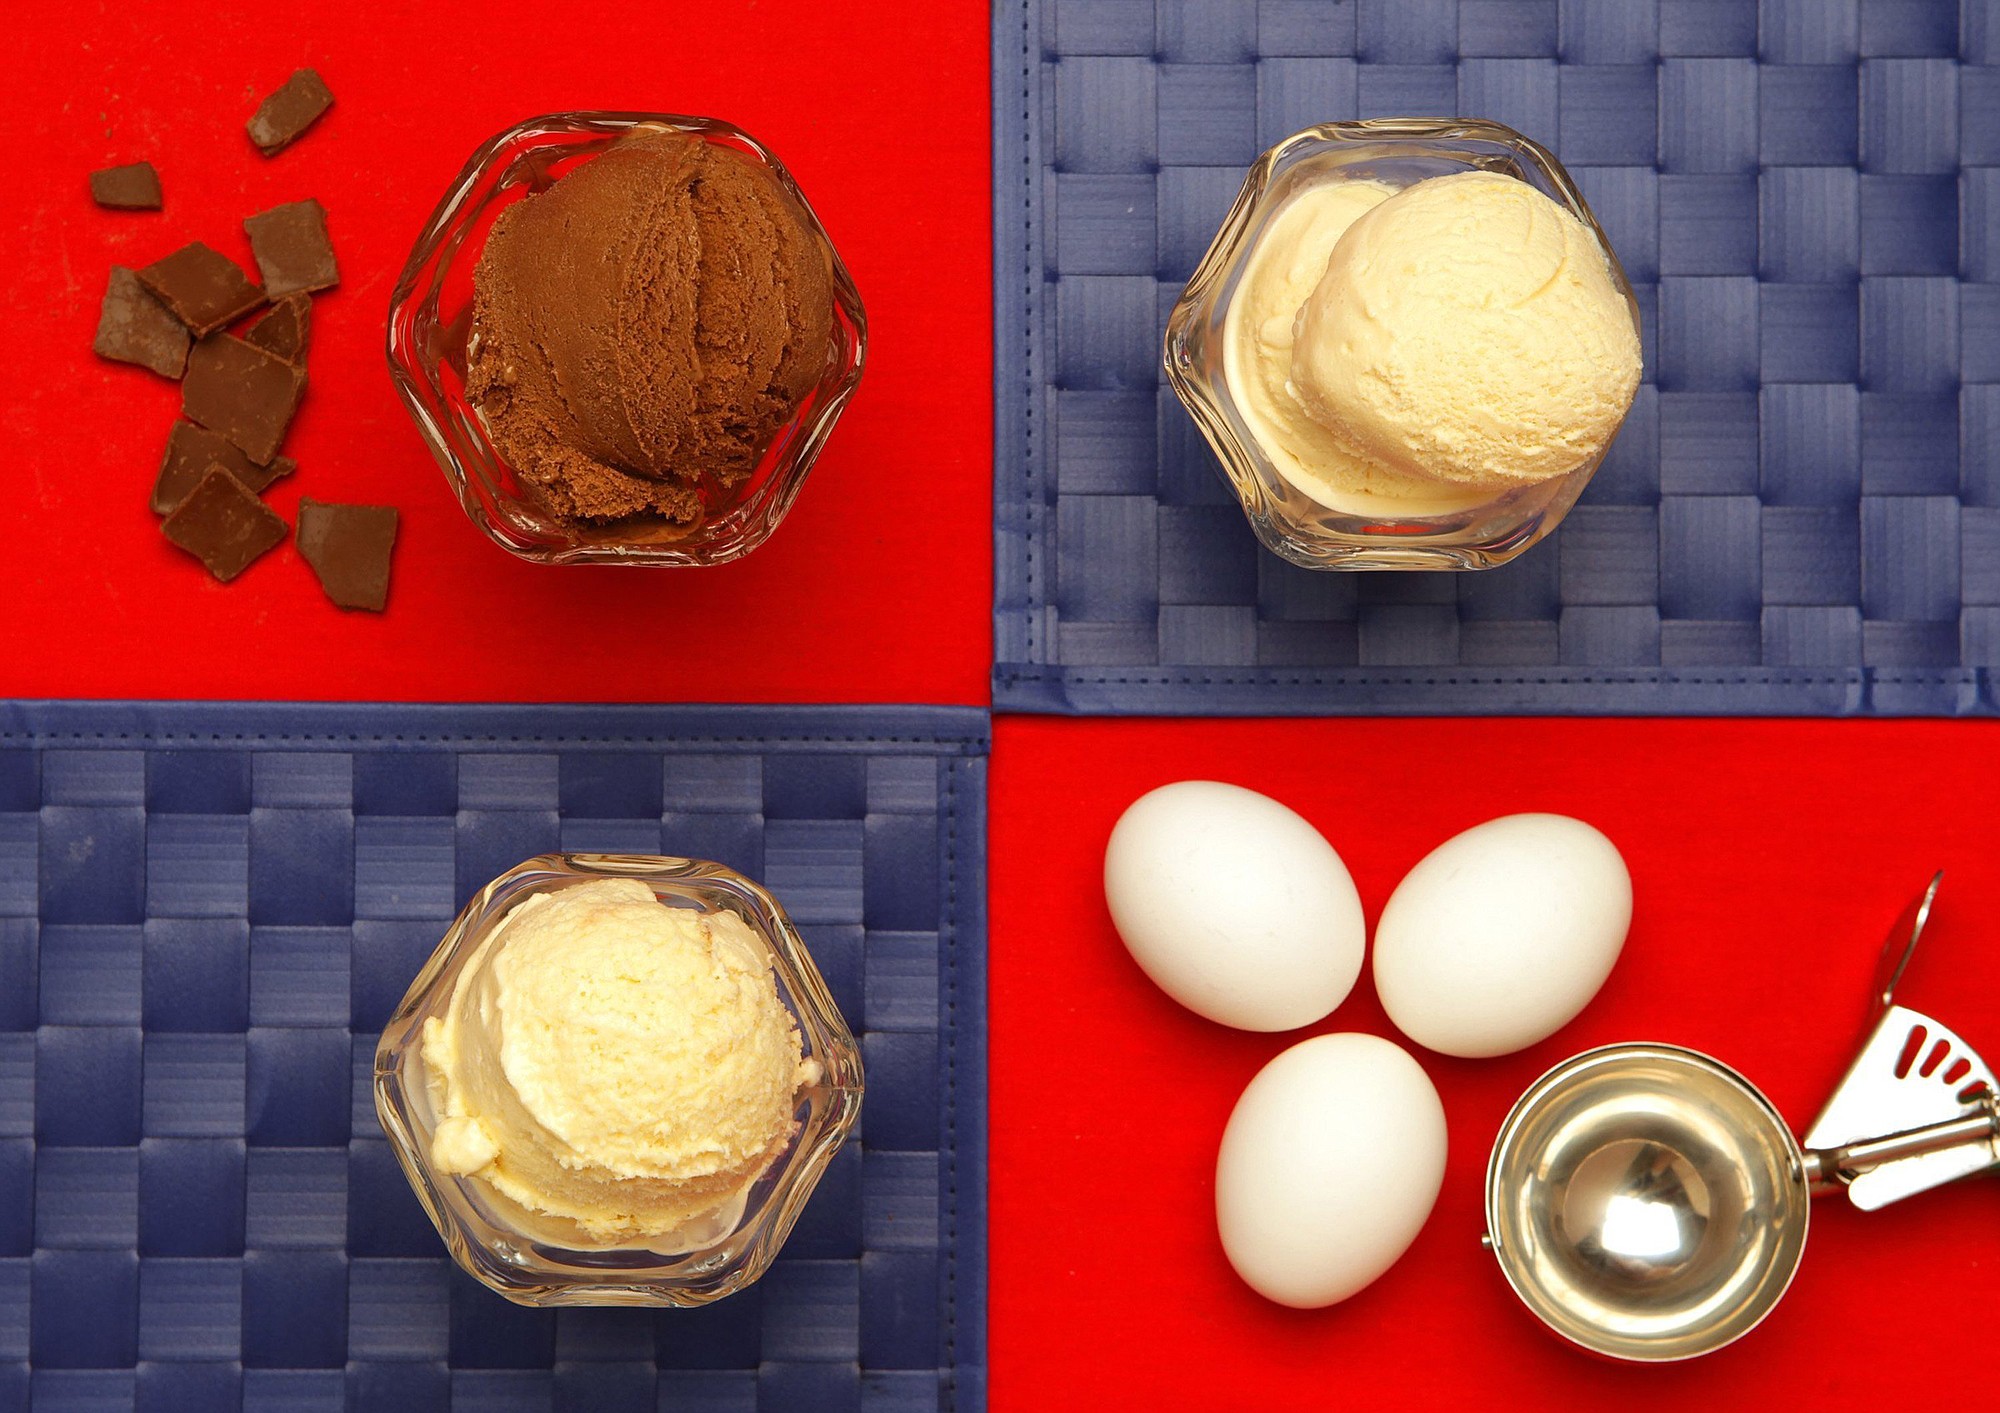 A sampling of homemade ice cream that includes, clockwise from top left, Glace au Chocolat, Salty Caramel, White Chocolate.